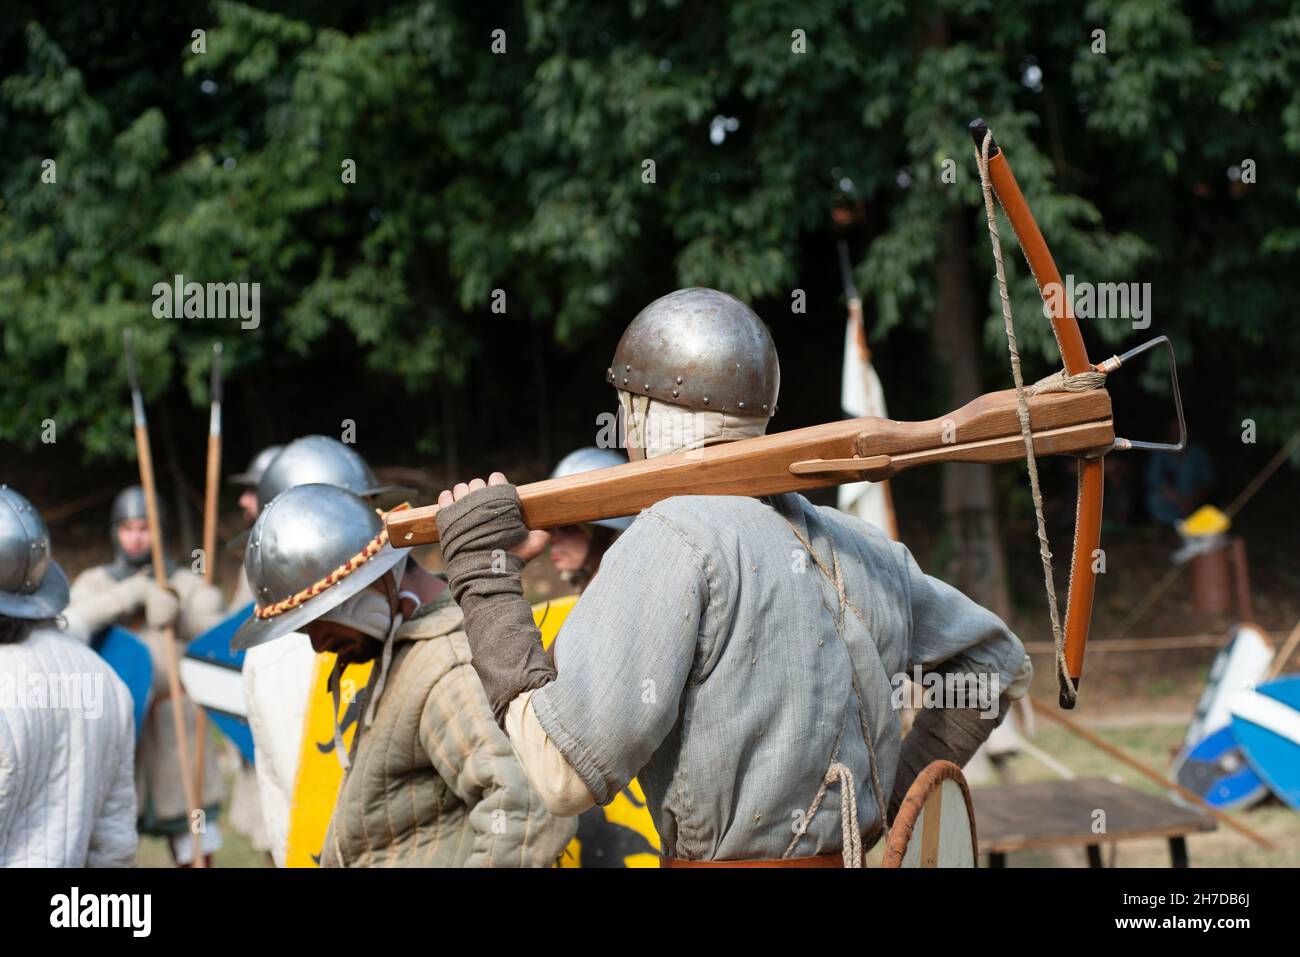 Italy, Lombardy, Medieval Historical Reenactment, Arbalester Stock Photo